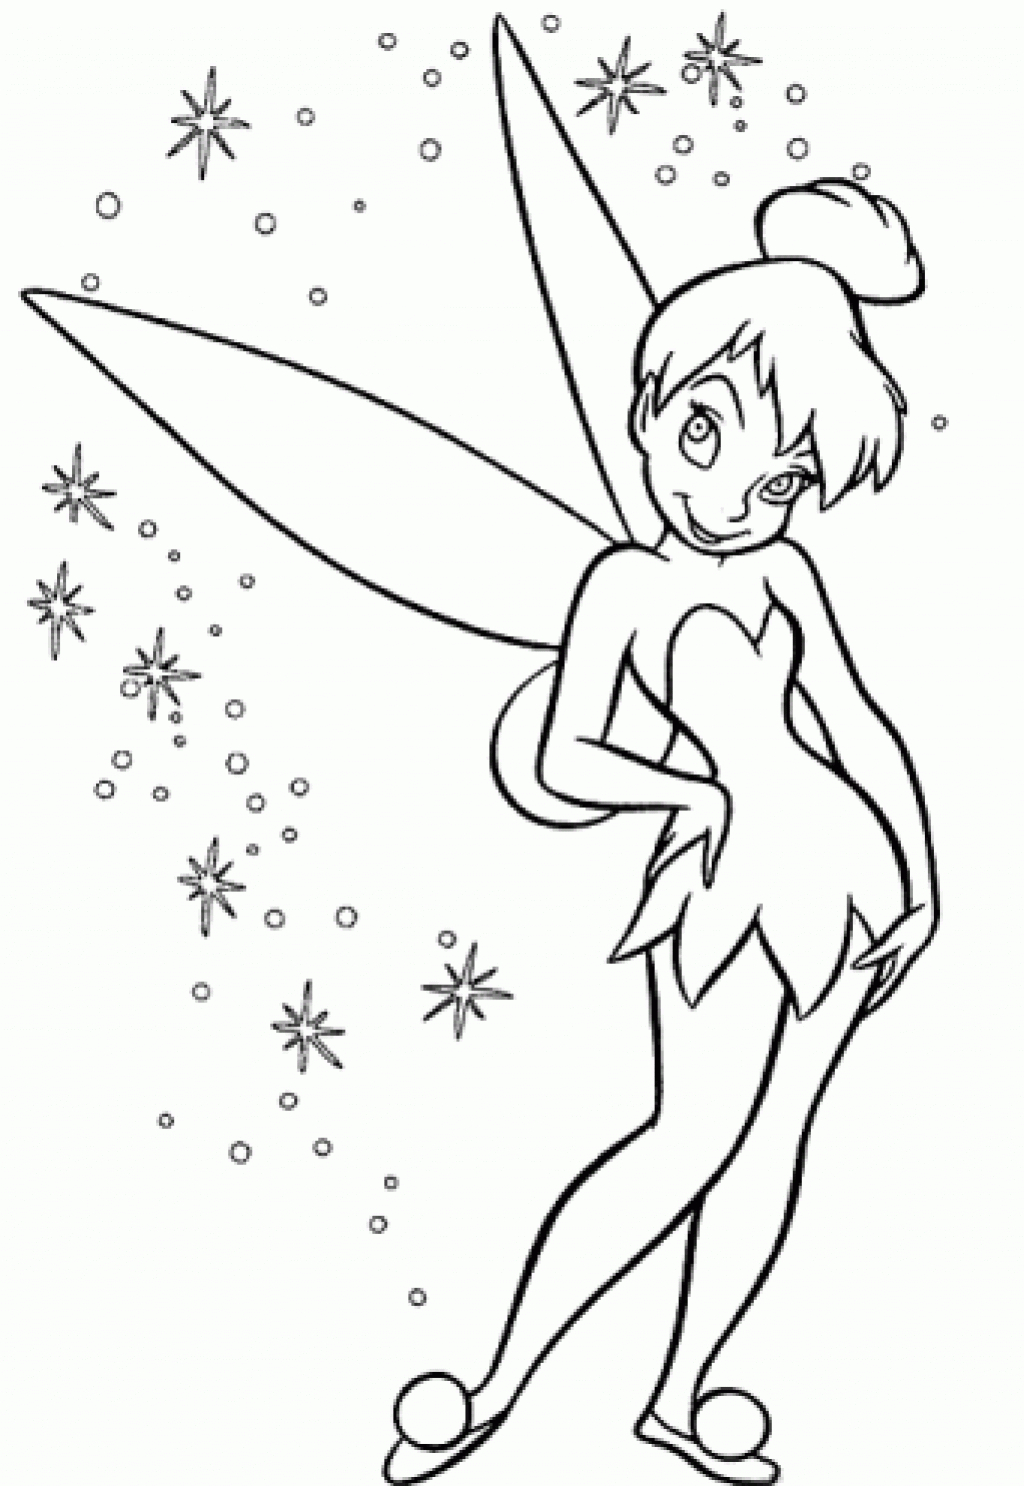 Free Printable Tinkerbell Coloring Pages For Kids | Christmas - Tinkerbell Coloring Pages Printable Free